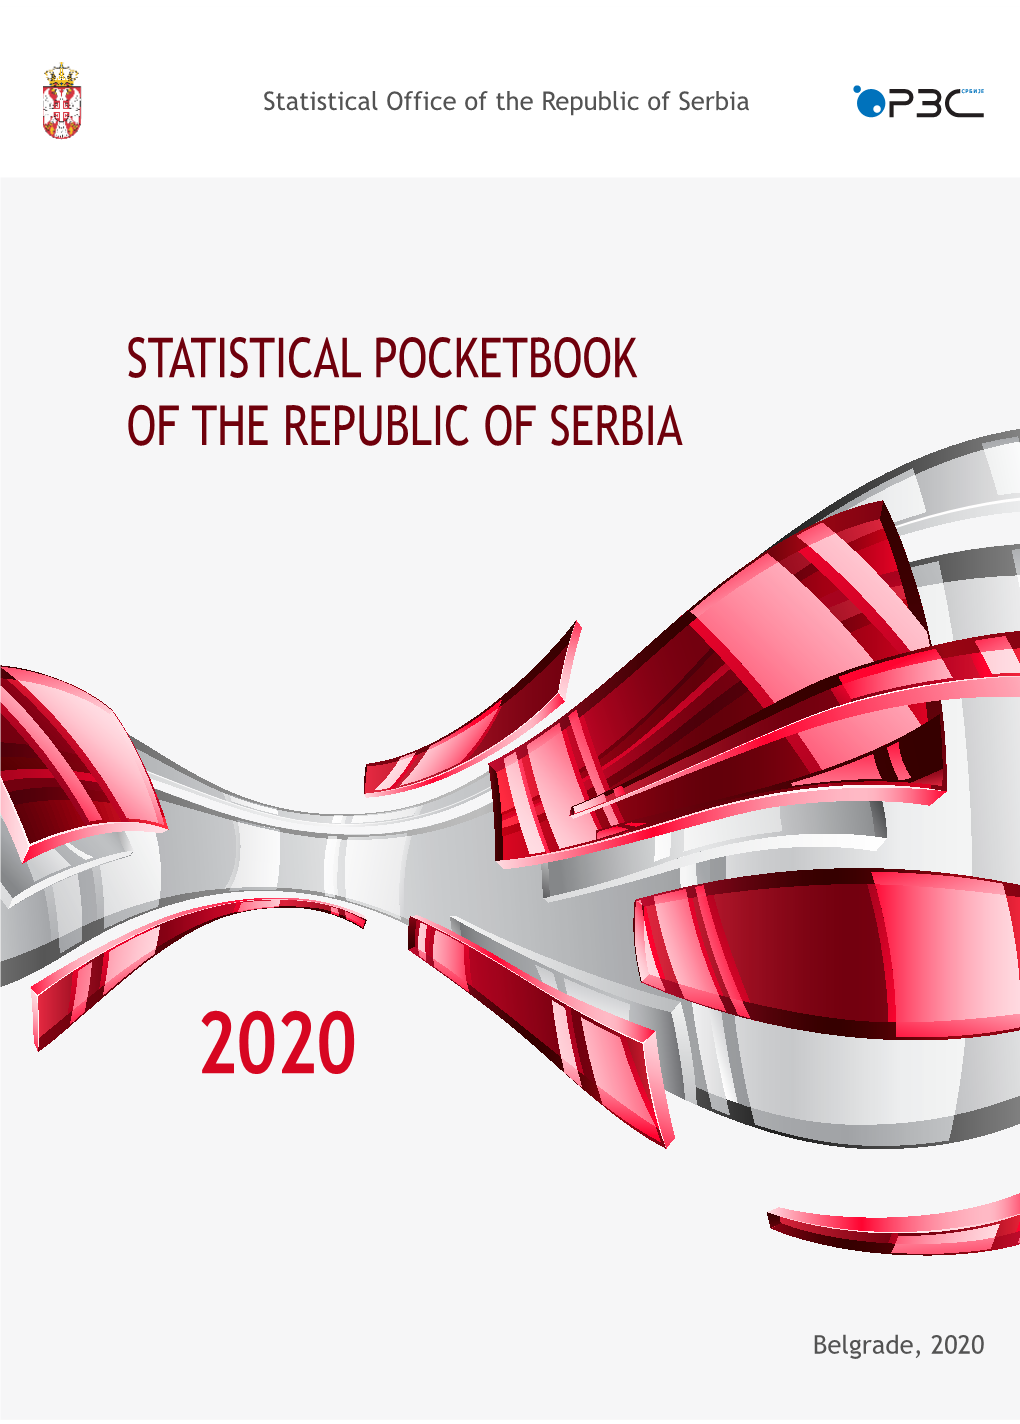 Statistical Pocketbook of the Republic of Serbia